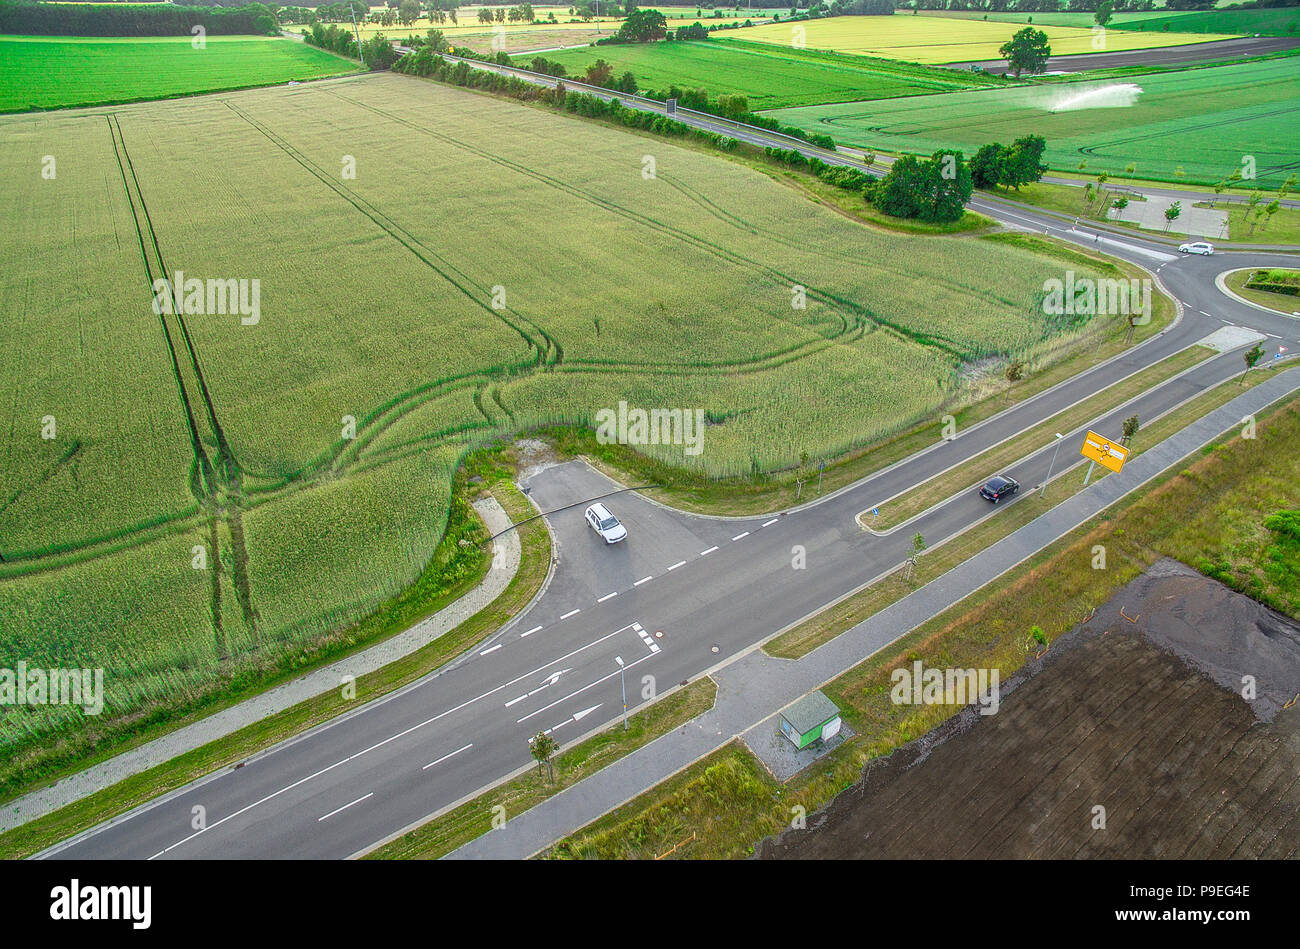 Aerial view of a road with signs and guidelines for traffic between a new development area for an industrial estate and an arable area with green whea Stock Photo